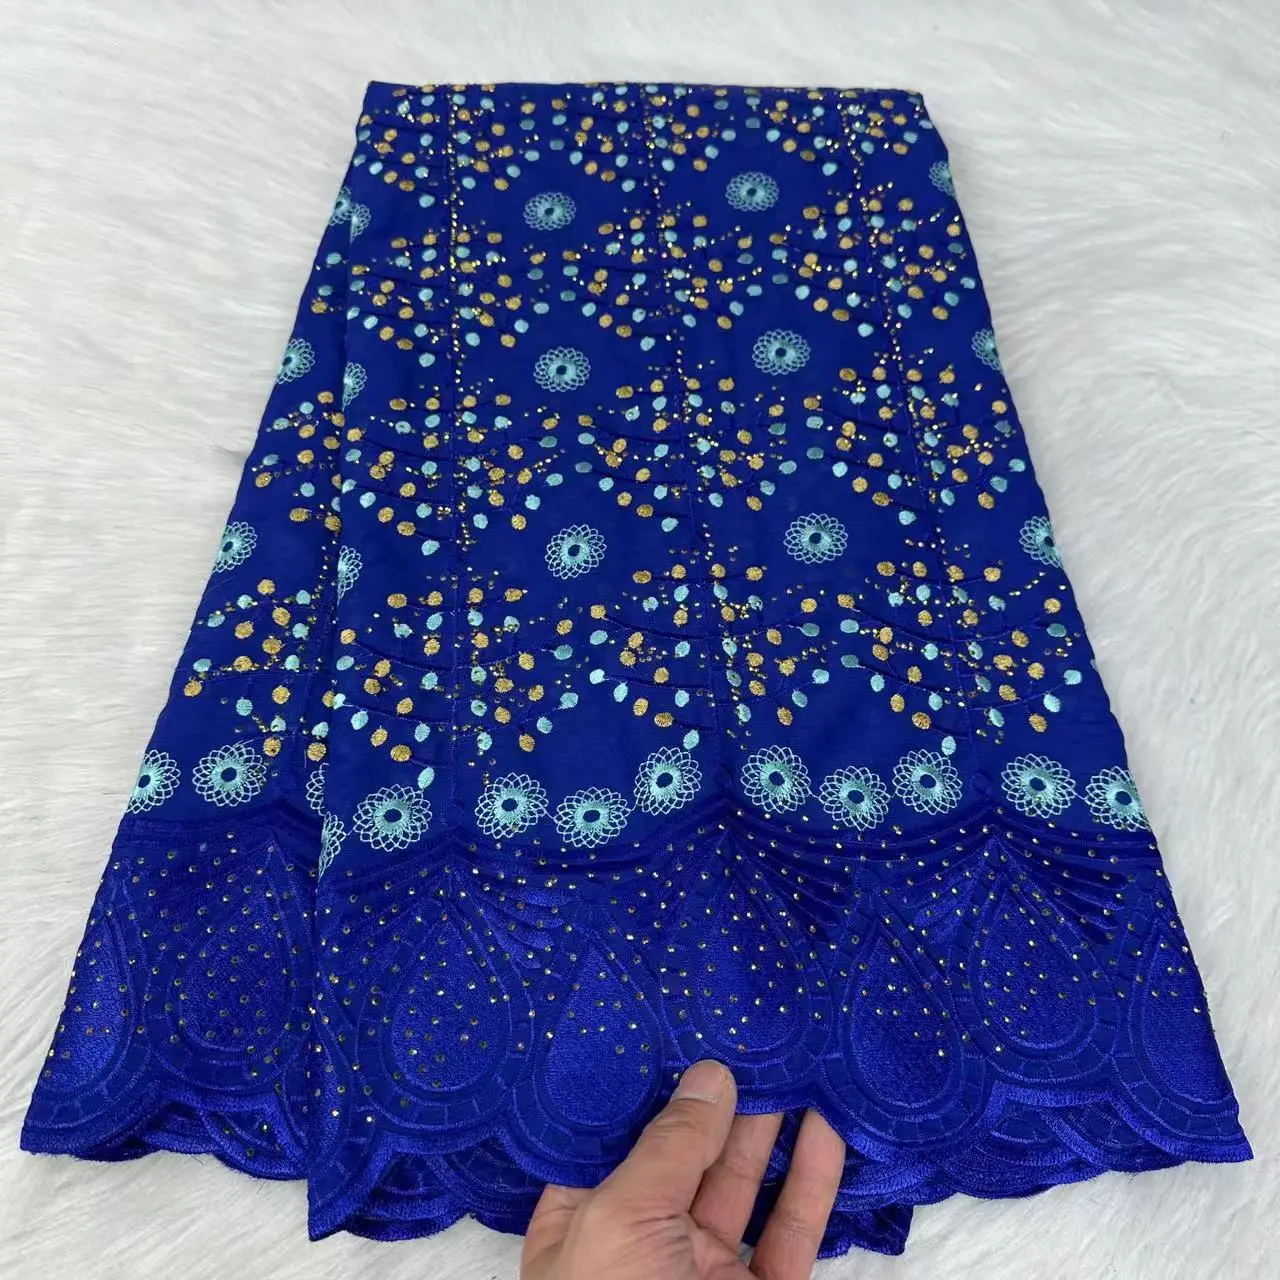 

Royal Blue Latest Swiss Embroidered Lace Fabric with Stones Nigerian 100% Cotton Lace Soft Fabrics 5Yards for Sewing Woman Dress